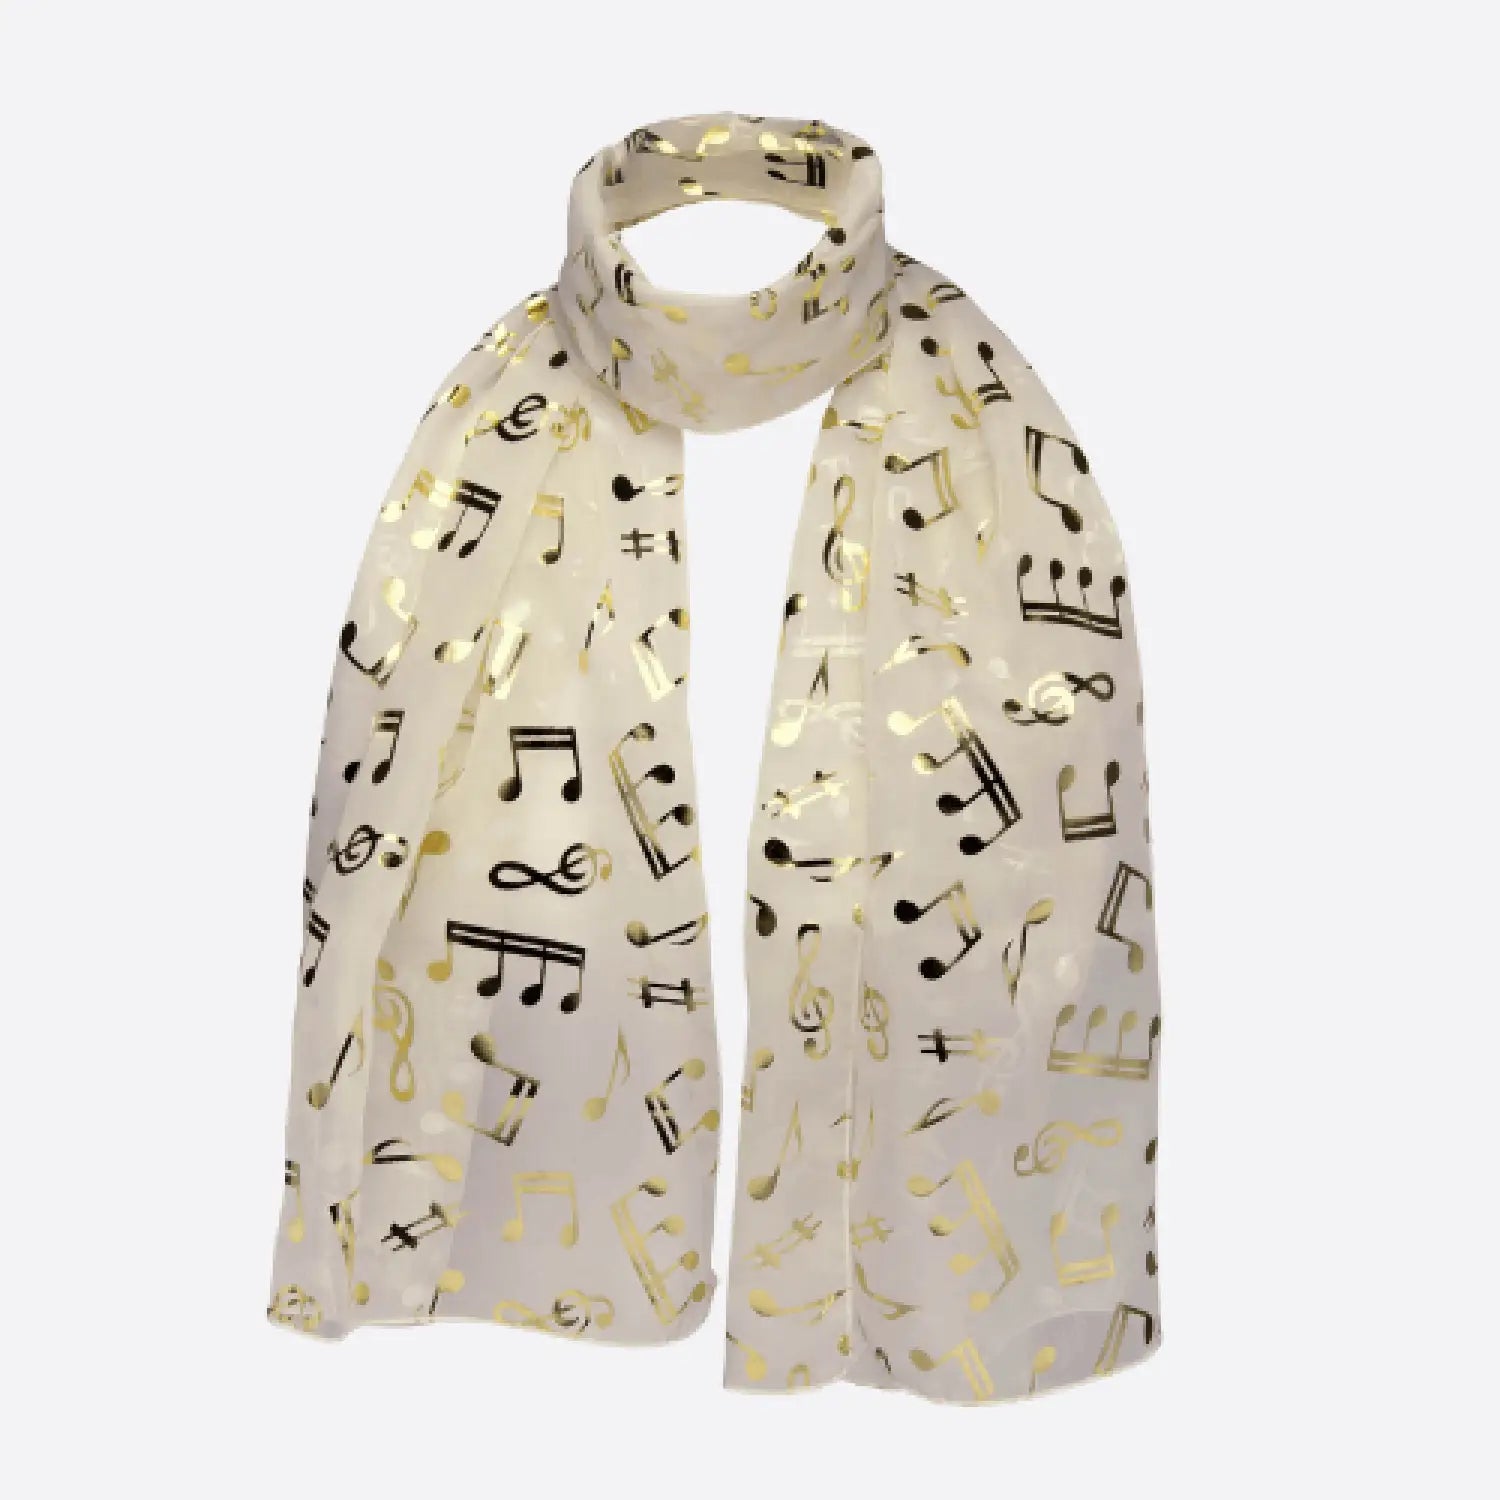 Gold Foil Music Note Chiffon Group Scarf.